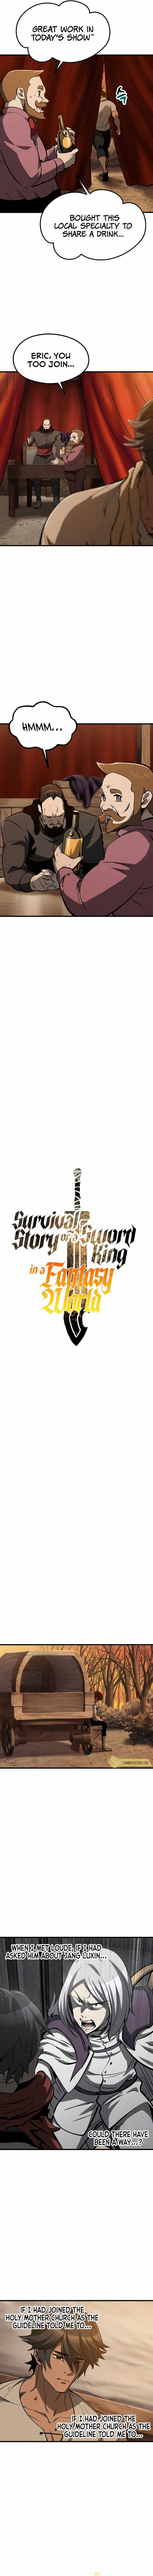 survival_story_of_a_sword_king_in_a_fantasy_world_190_8